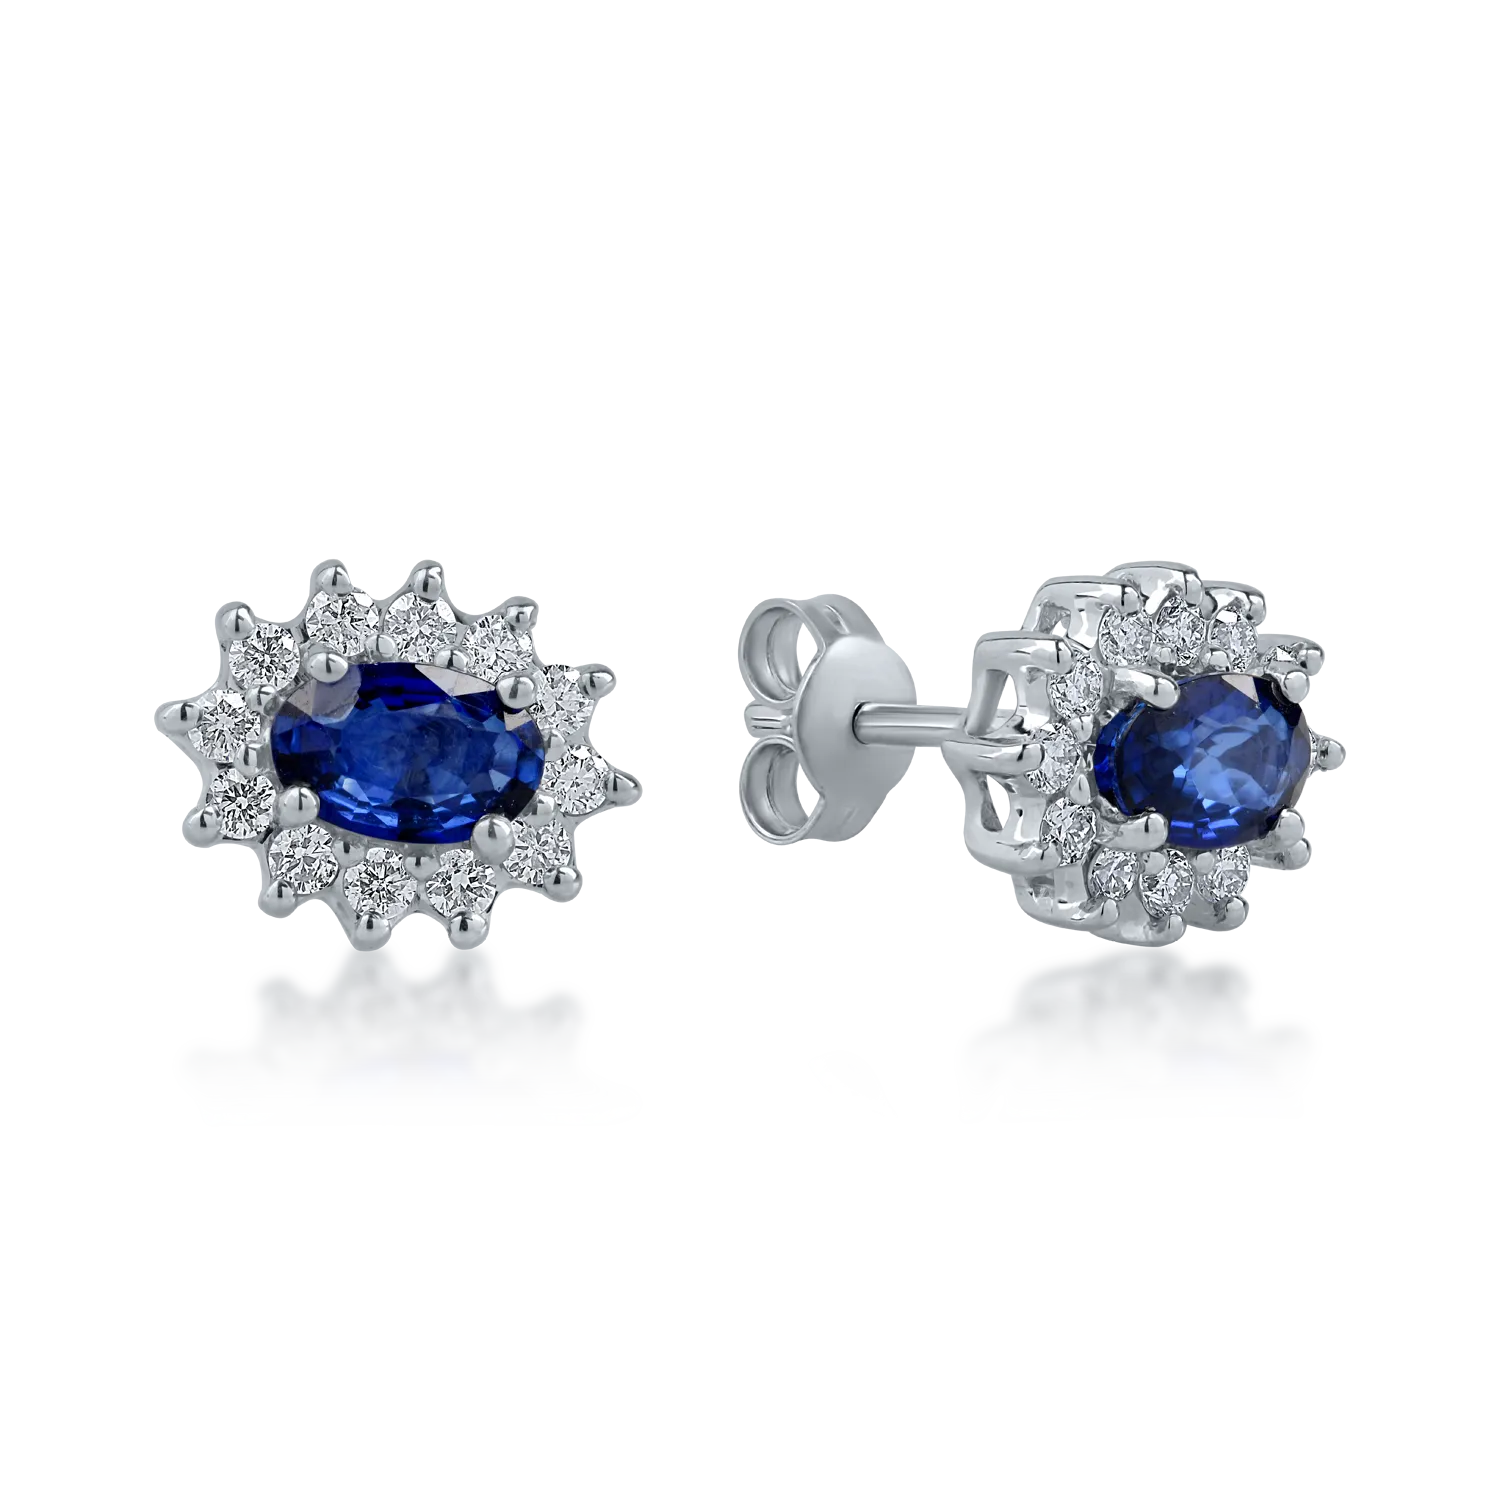 White gold earrings with 1.16ct sapphires and 0.44ct diamonds